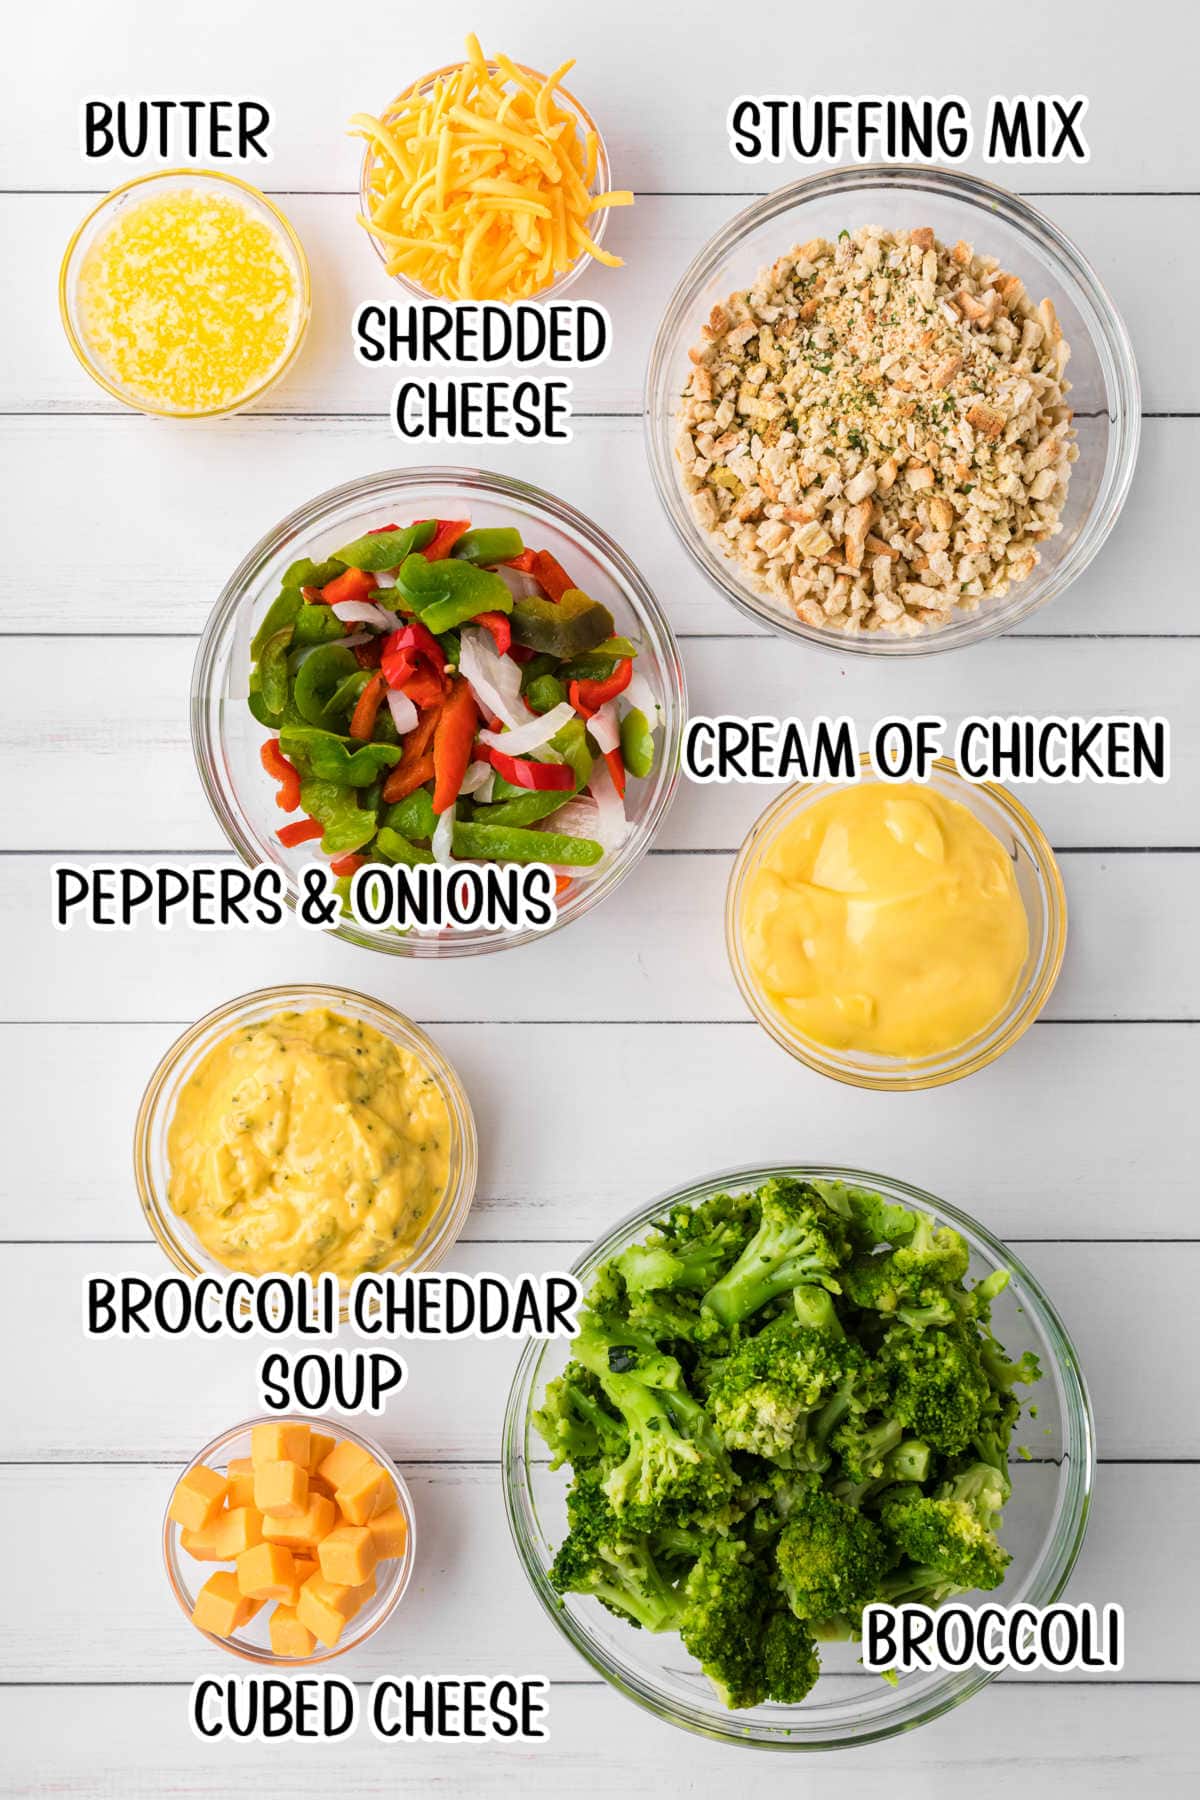 Ingredients in glass bowls: butter, cheese, stuffing, broccoli cheddar soup, fresh broccoli, peppers, onions, and soup.